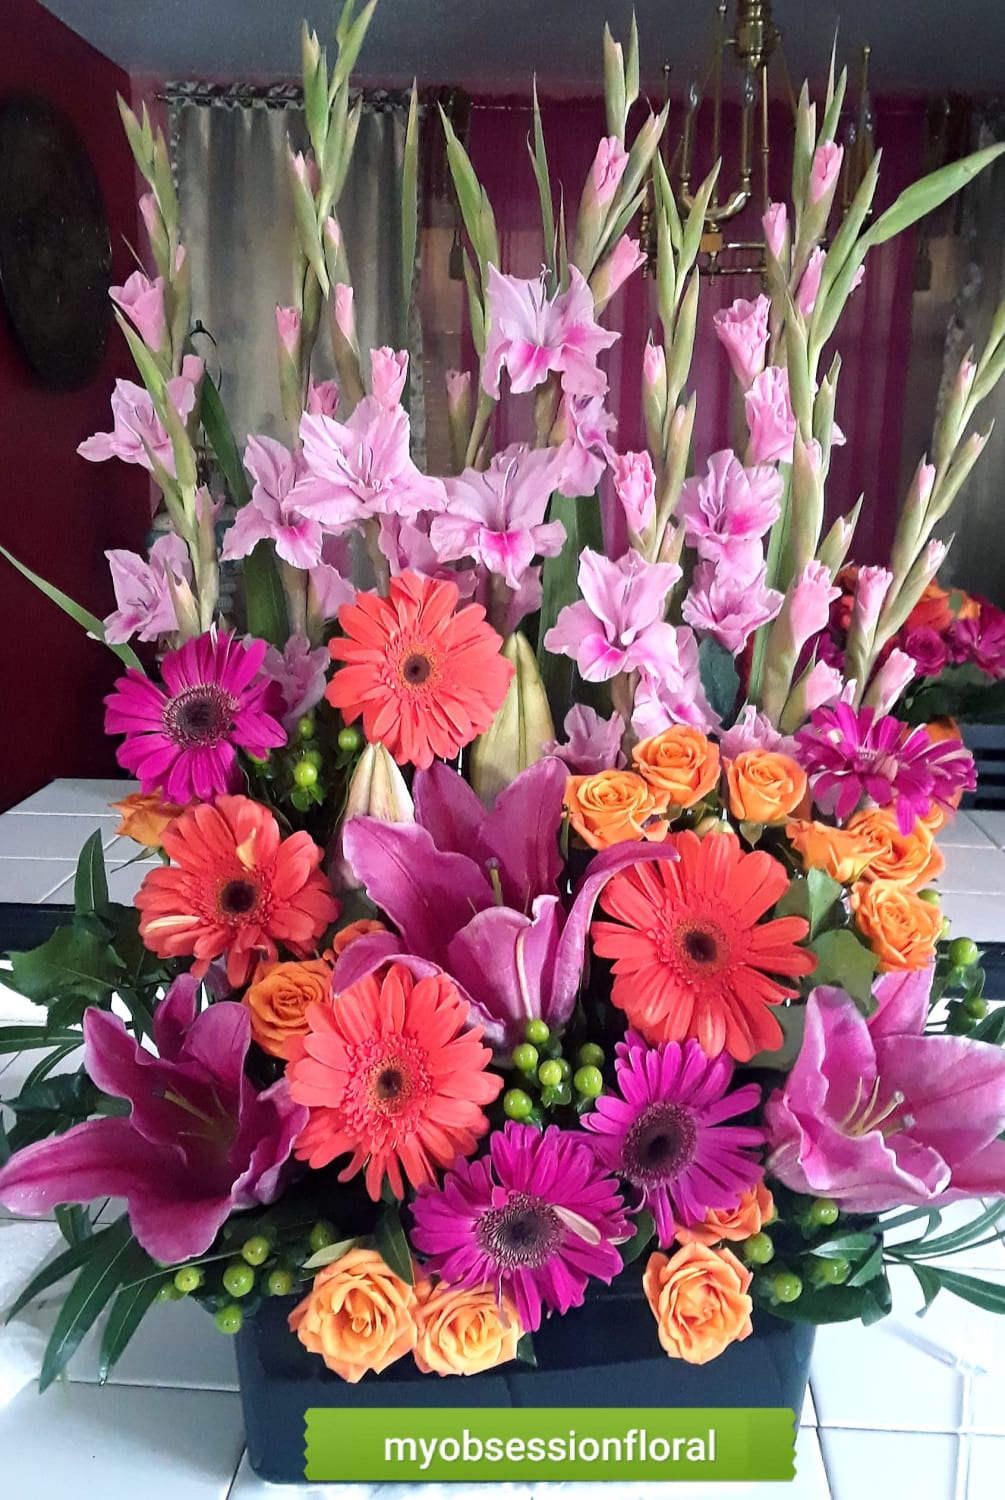 Order this stunning mix of lilies, spray roses, gerber daisies, and gladiolas